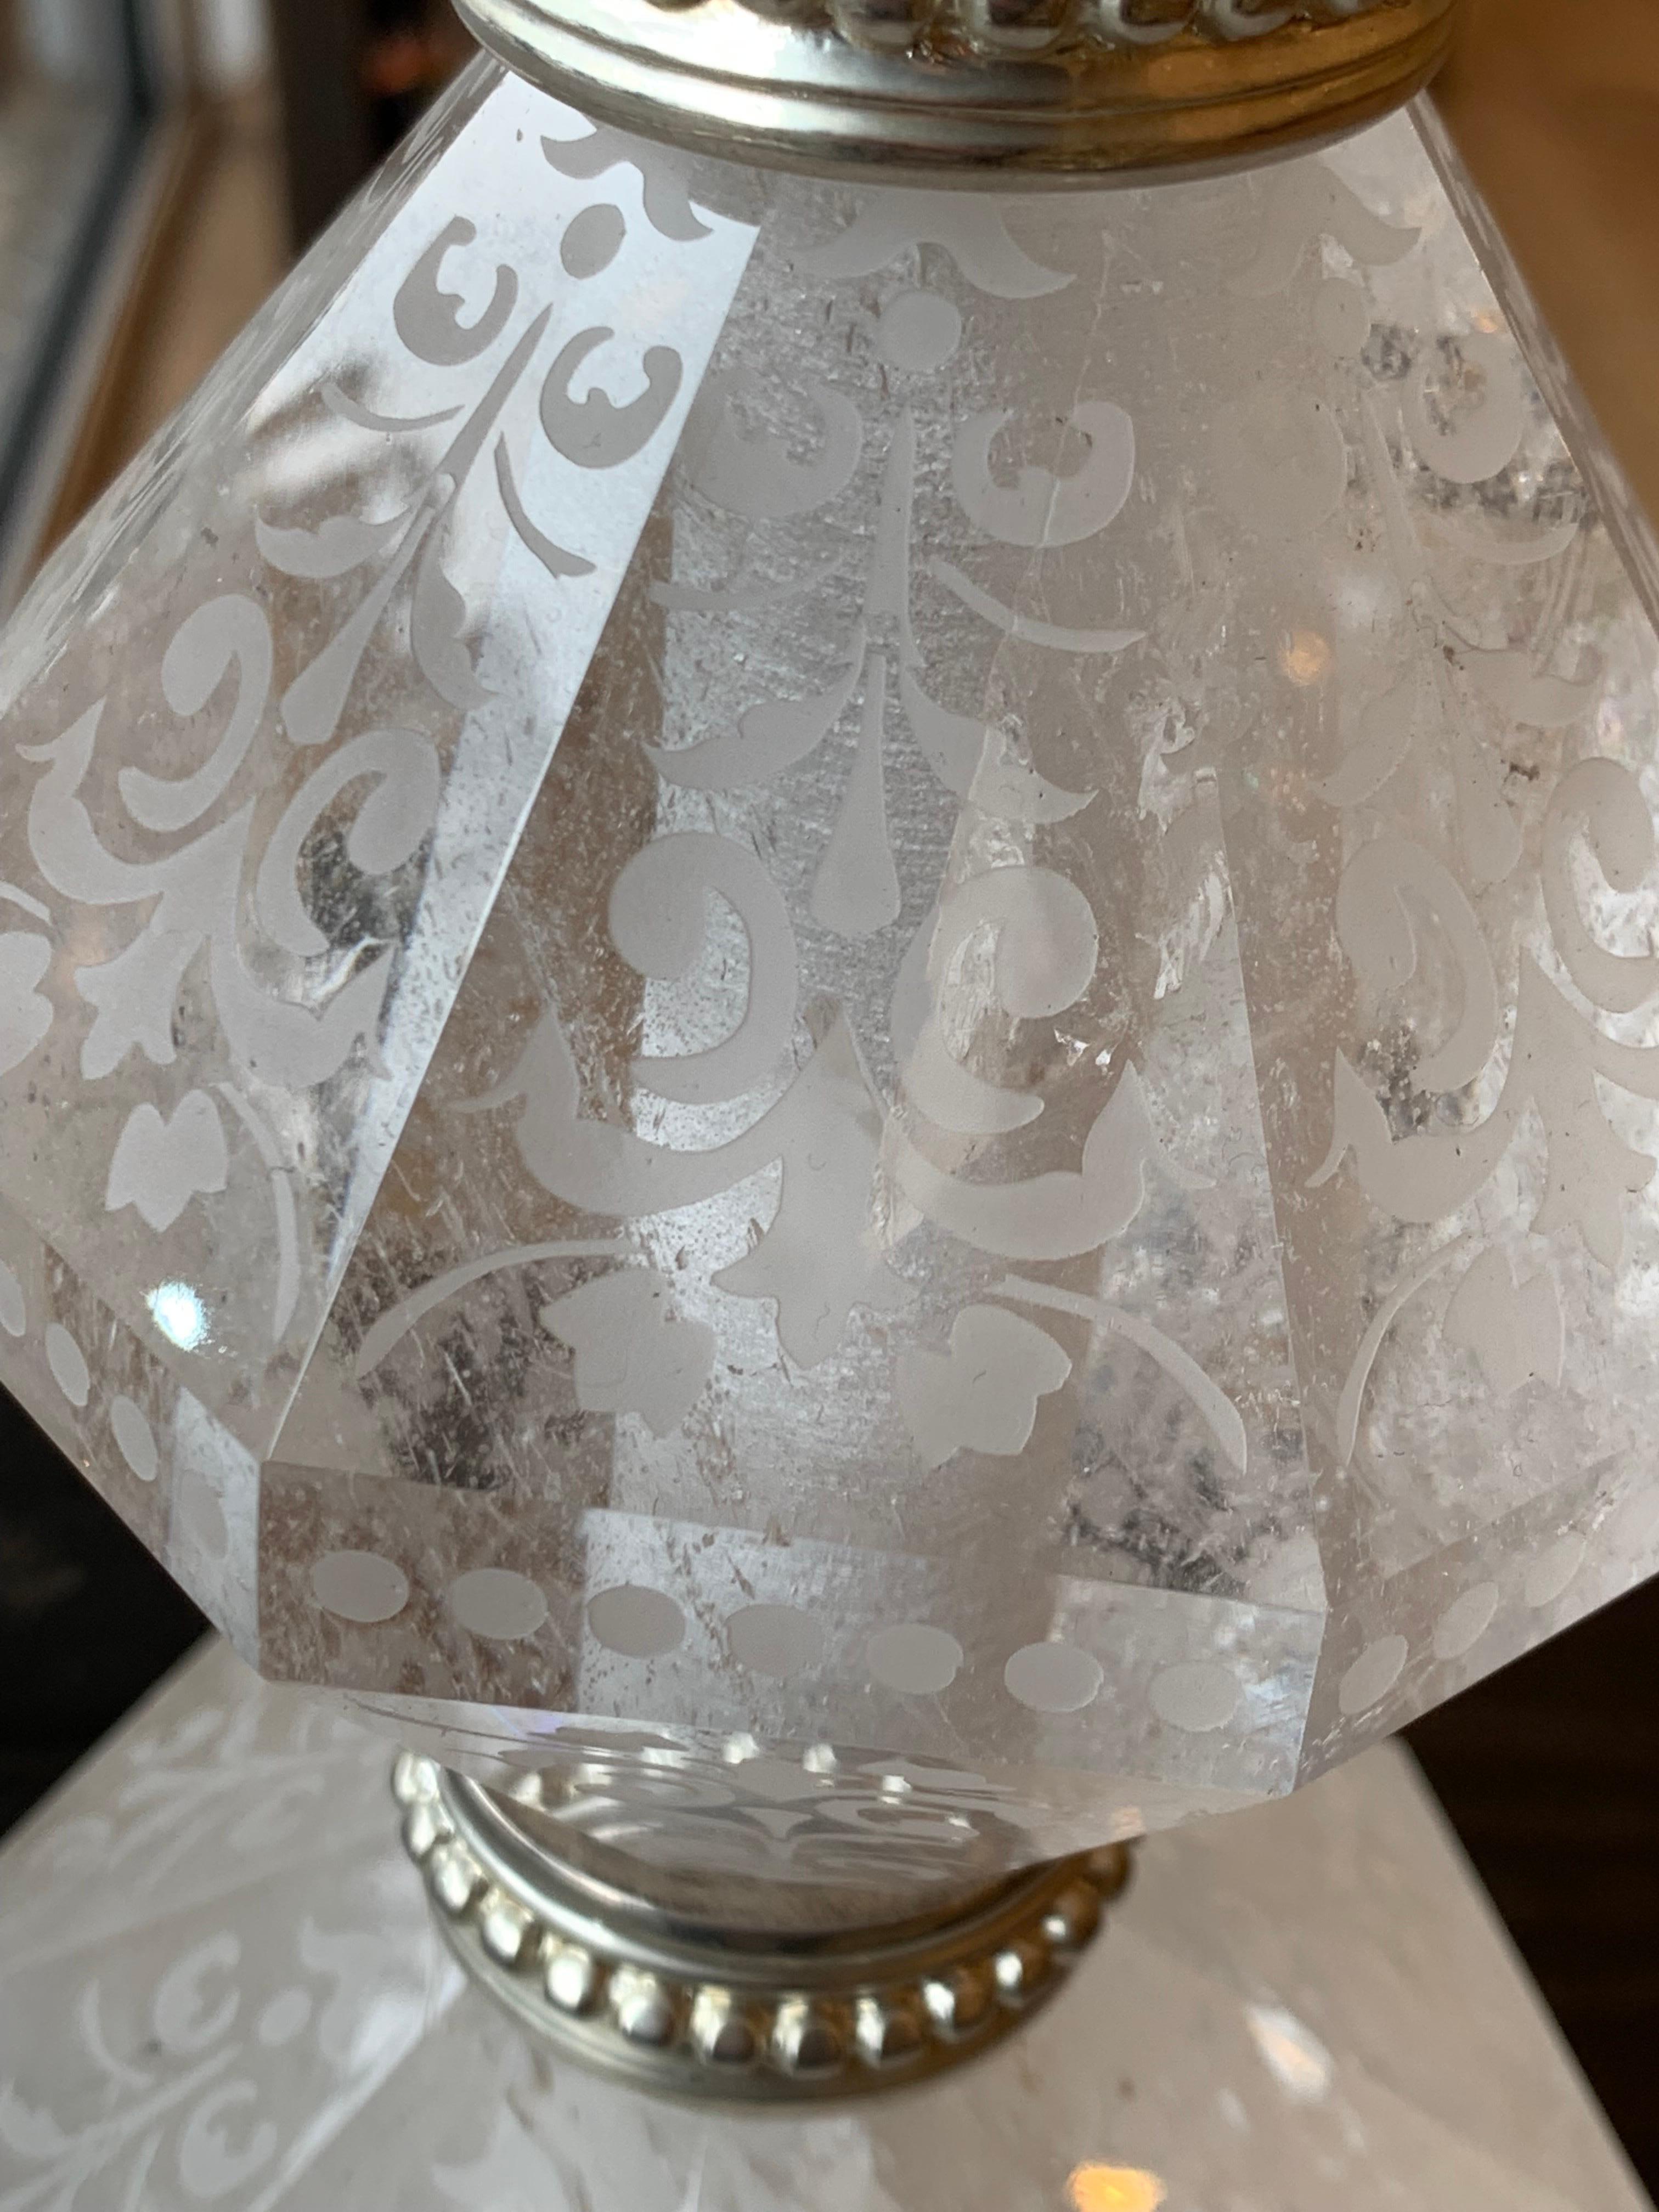 This majestic and elegant lamp in silver bronze and rock crystal is a creation of our workshop.
It is composed of five parts in rock crystal meticulously decorated with etched patterns. The bronze parts are finely decorated with a frieze of dots